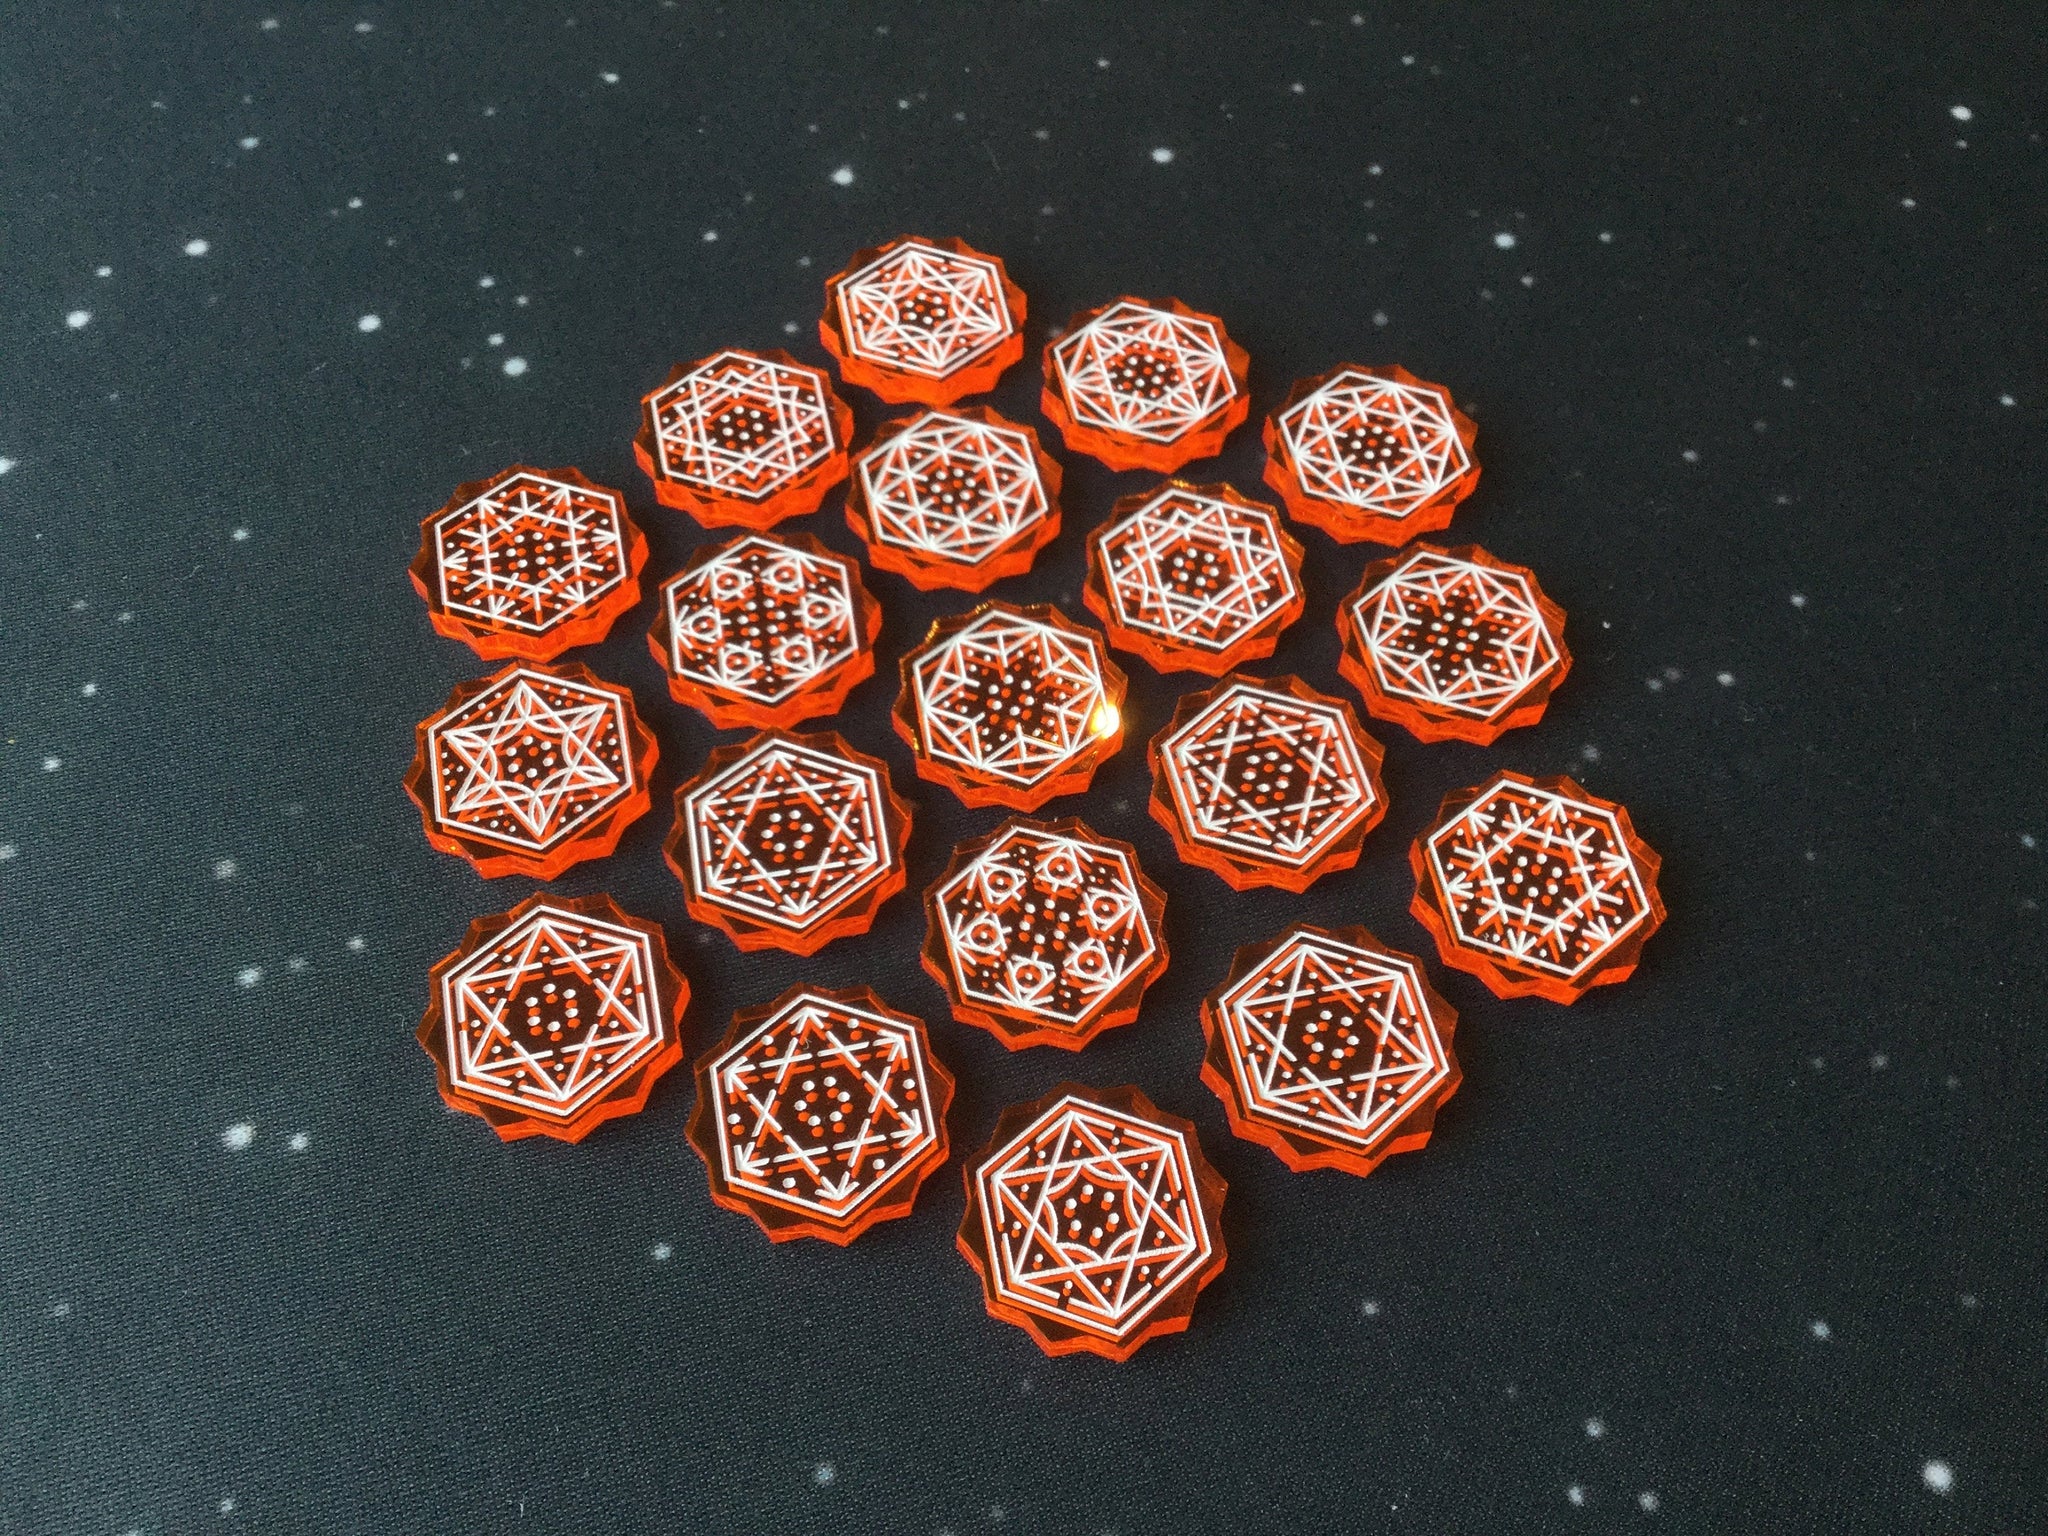 20 x Aember Tokens for Keyforge